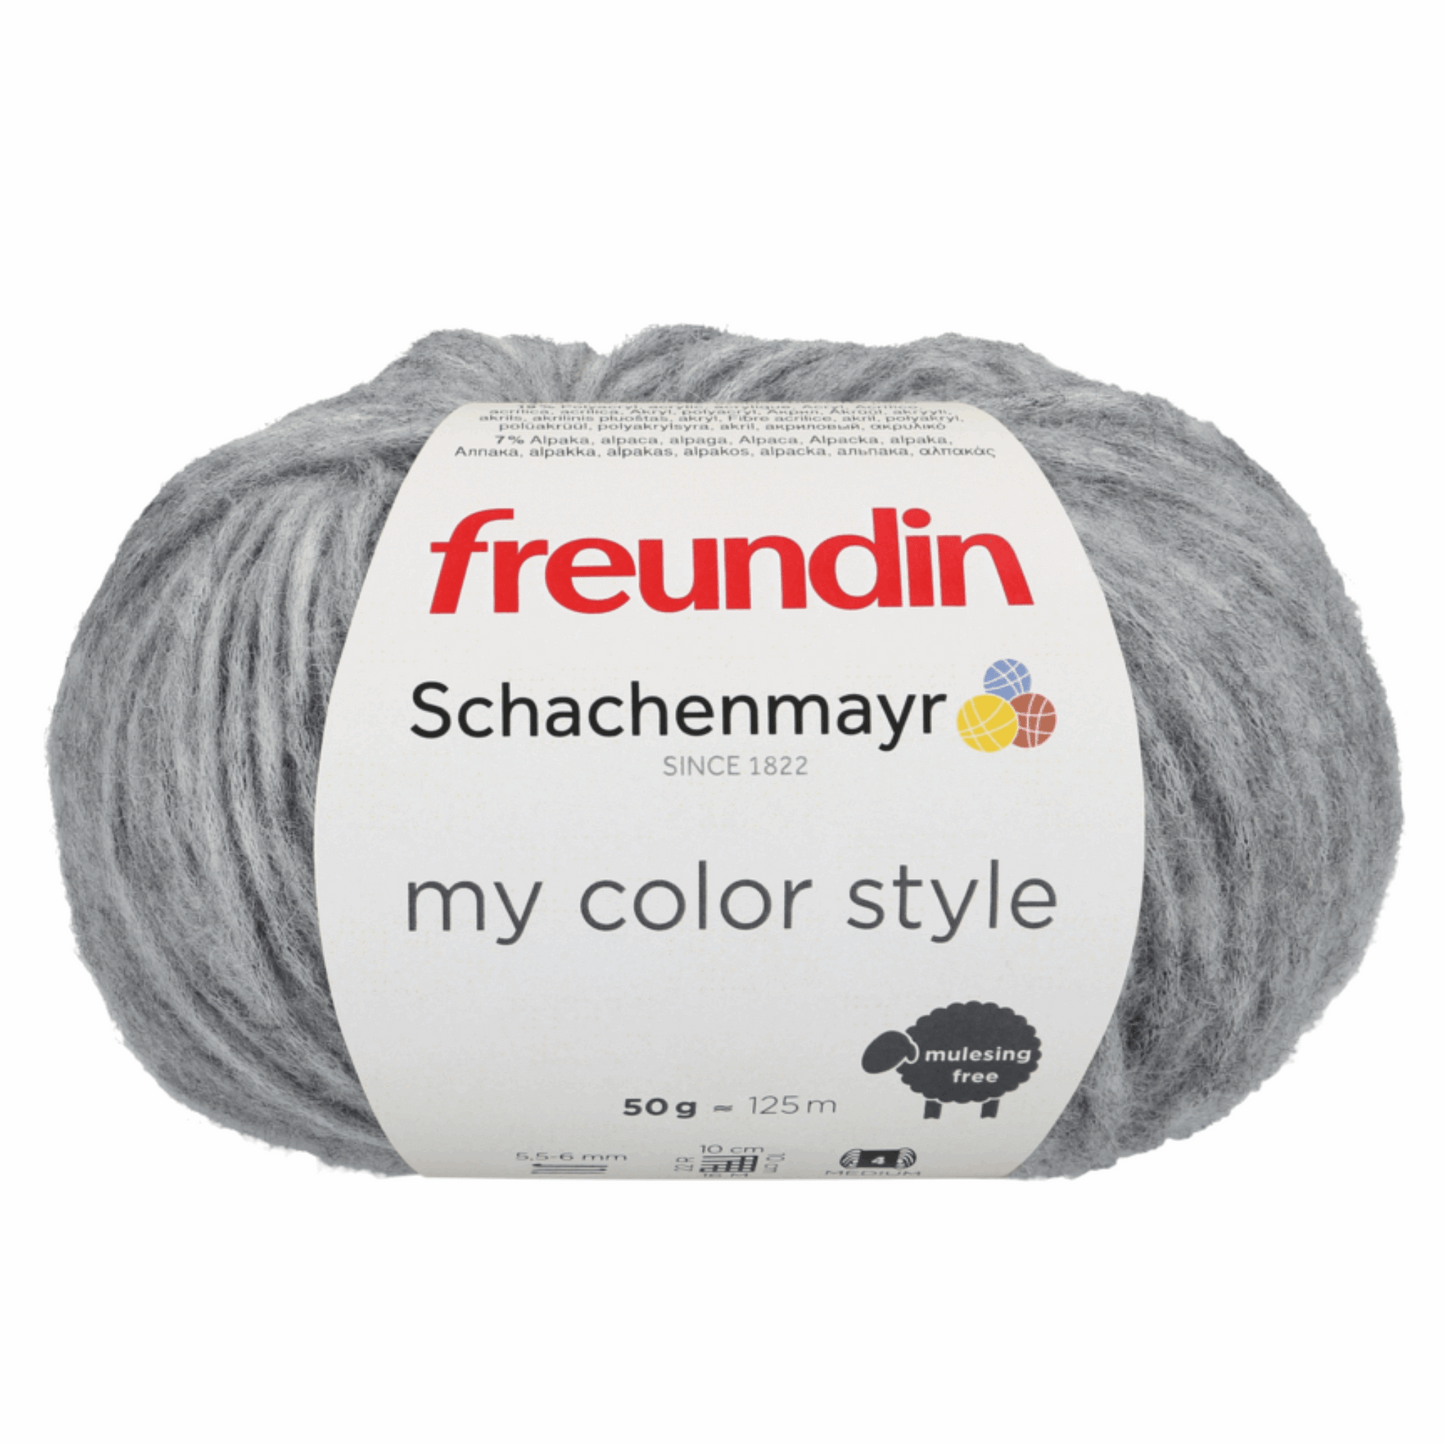 Schachenmayr My Color Style 50g, 97117, Farbe grey melange 90